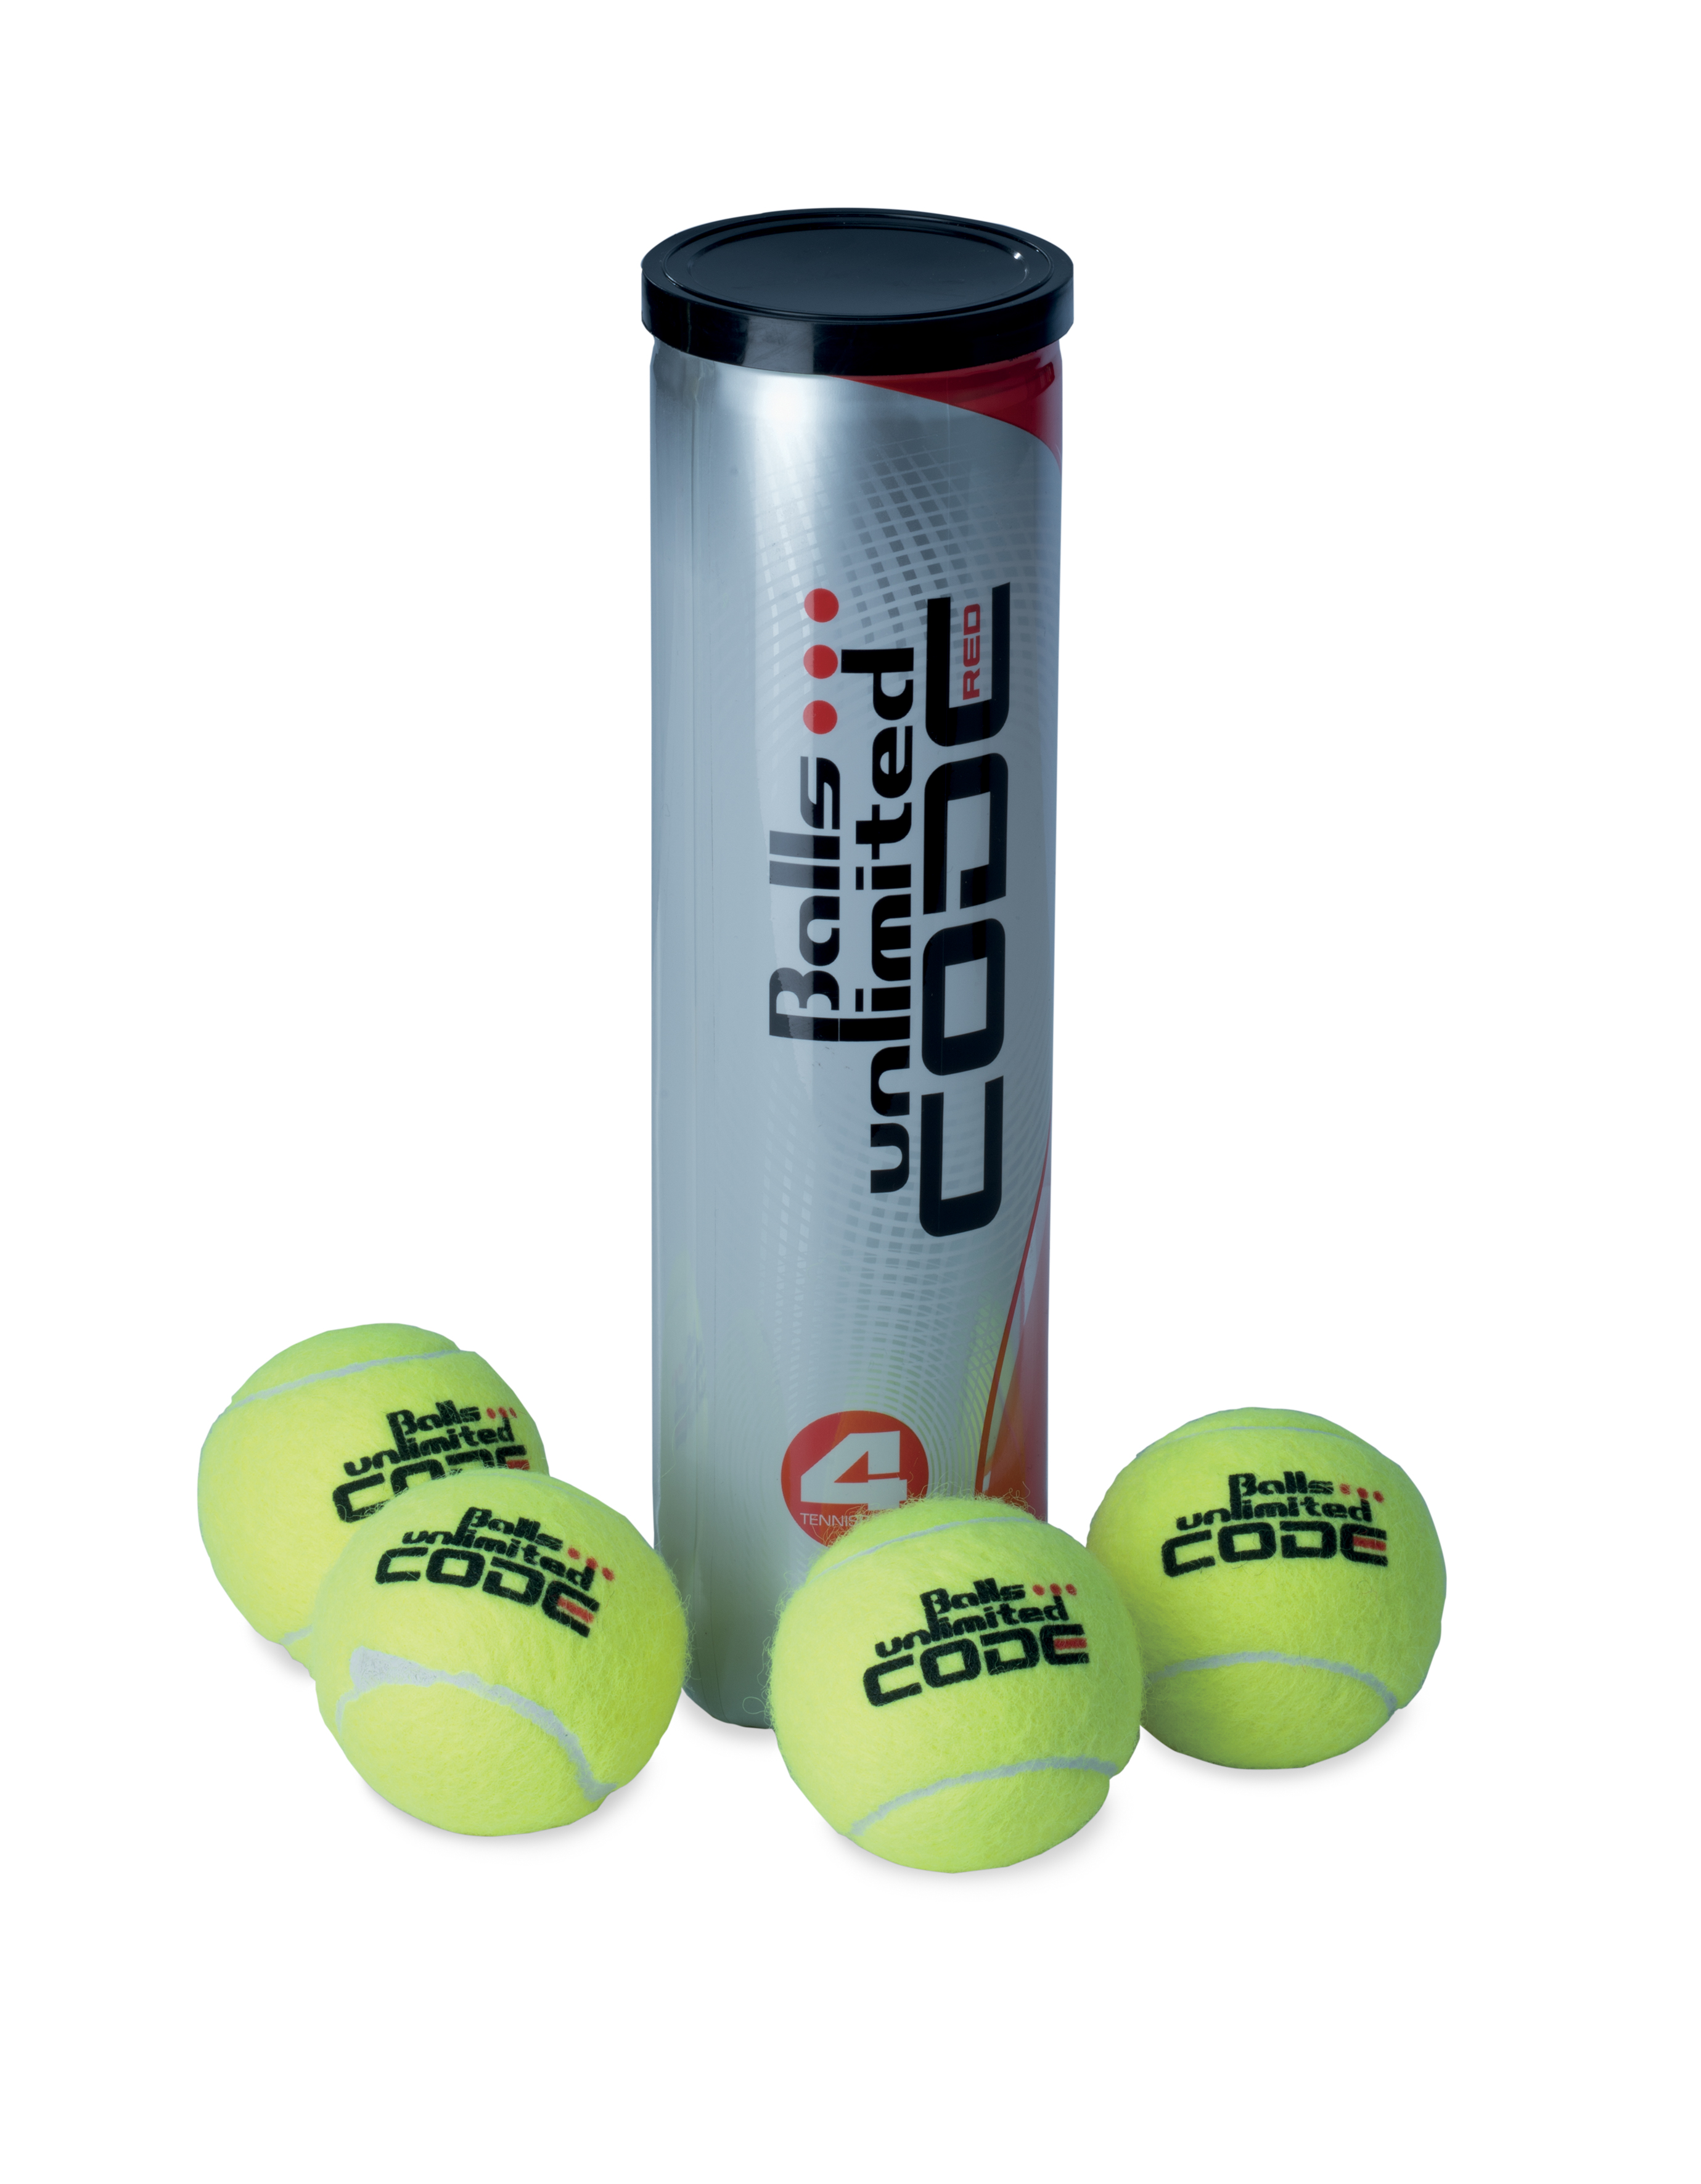 Tennisball Balls Unlimited Code Red - pack of 4